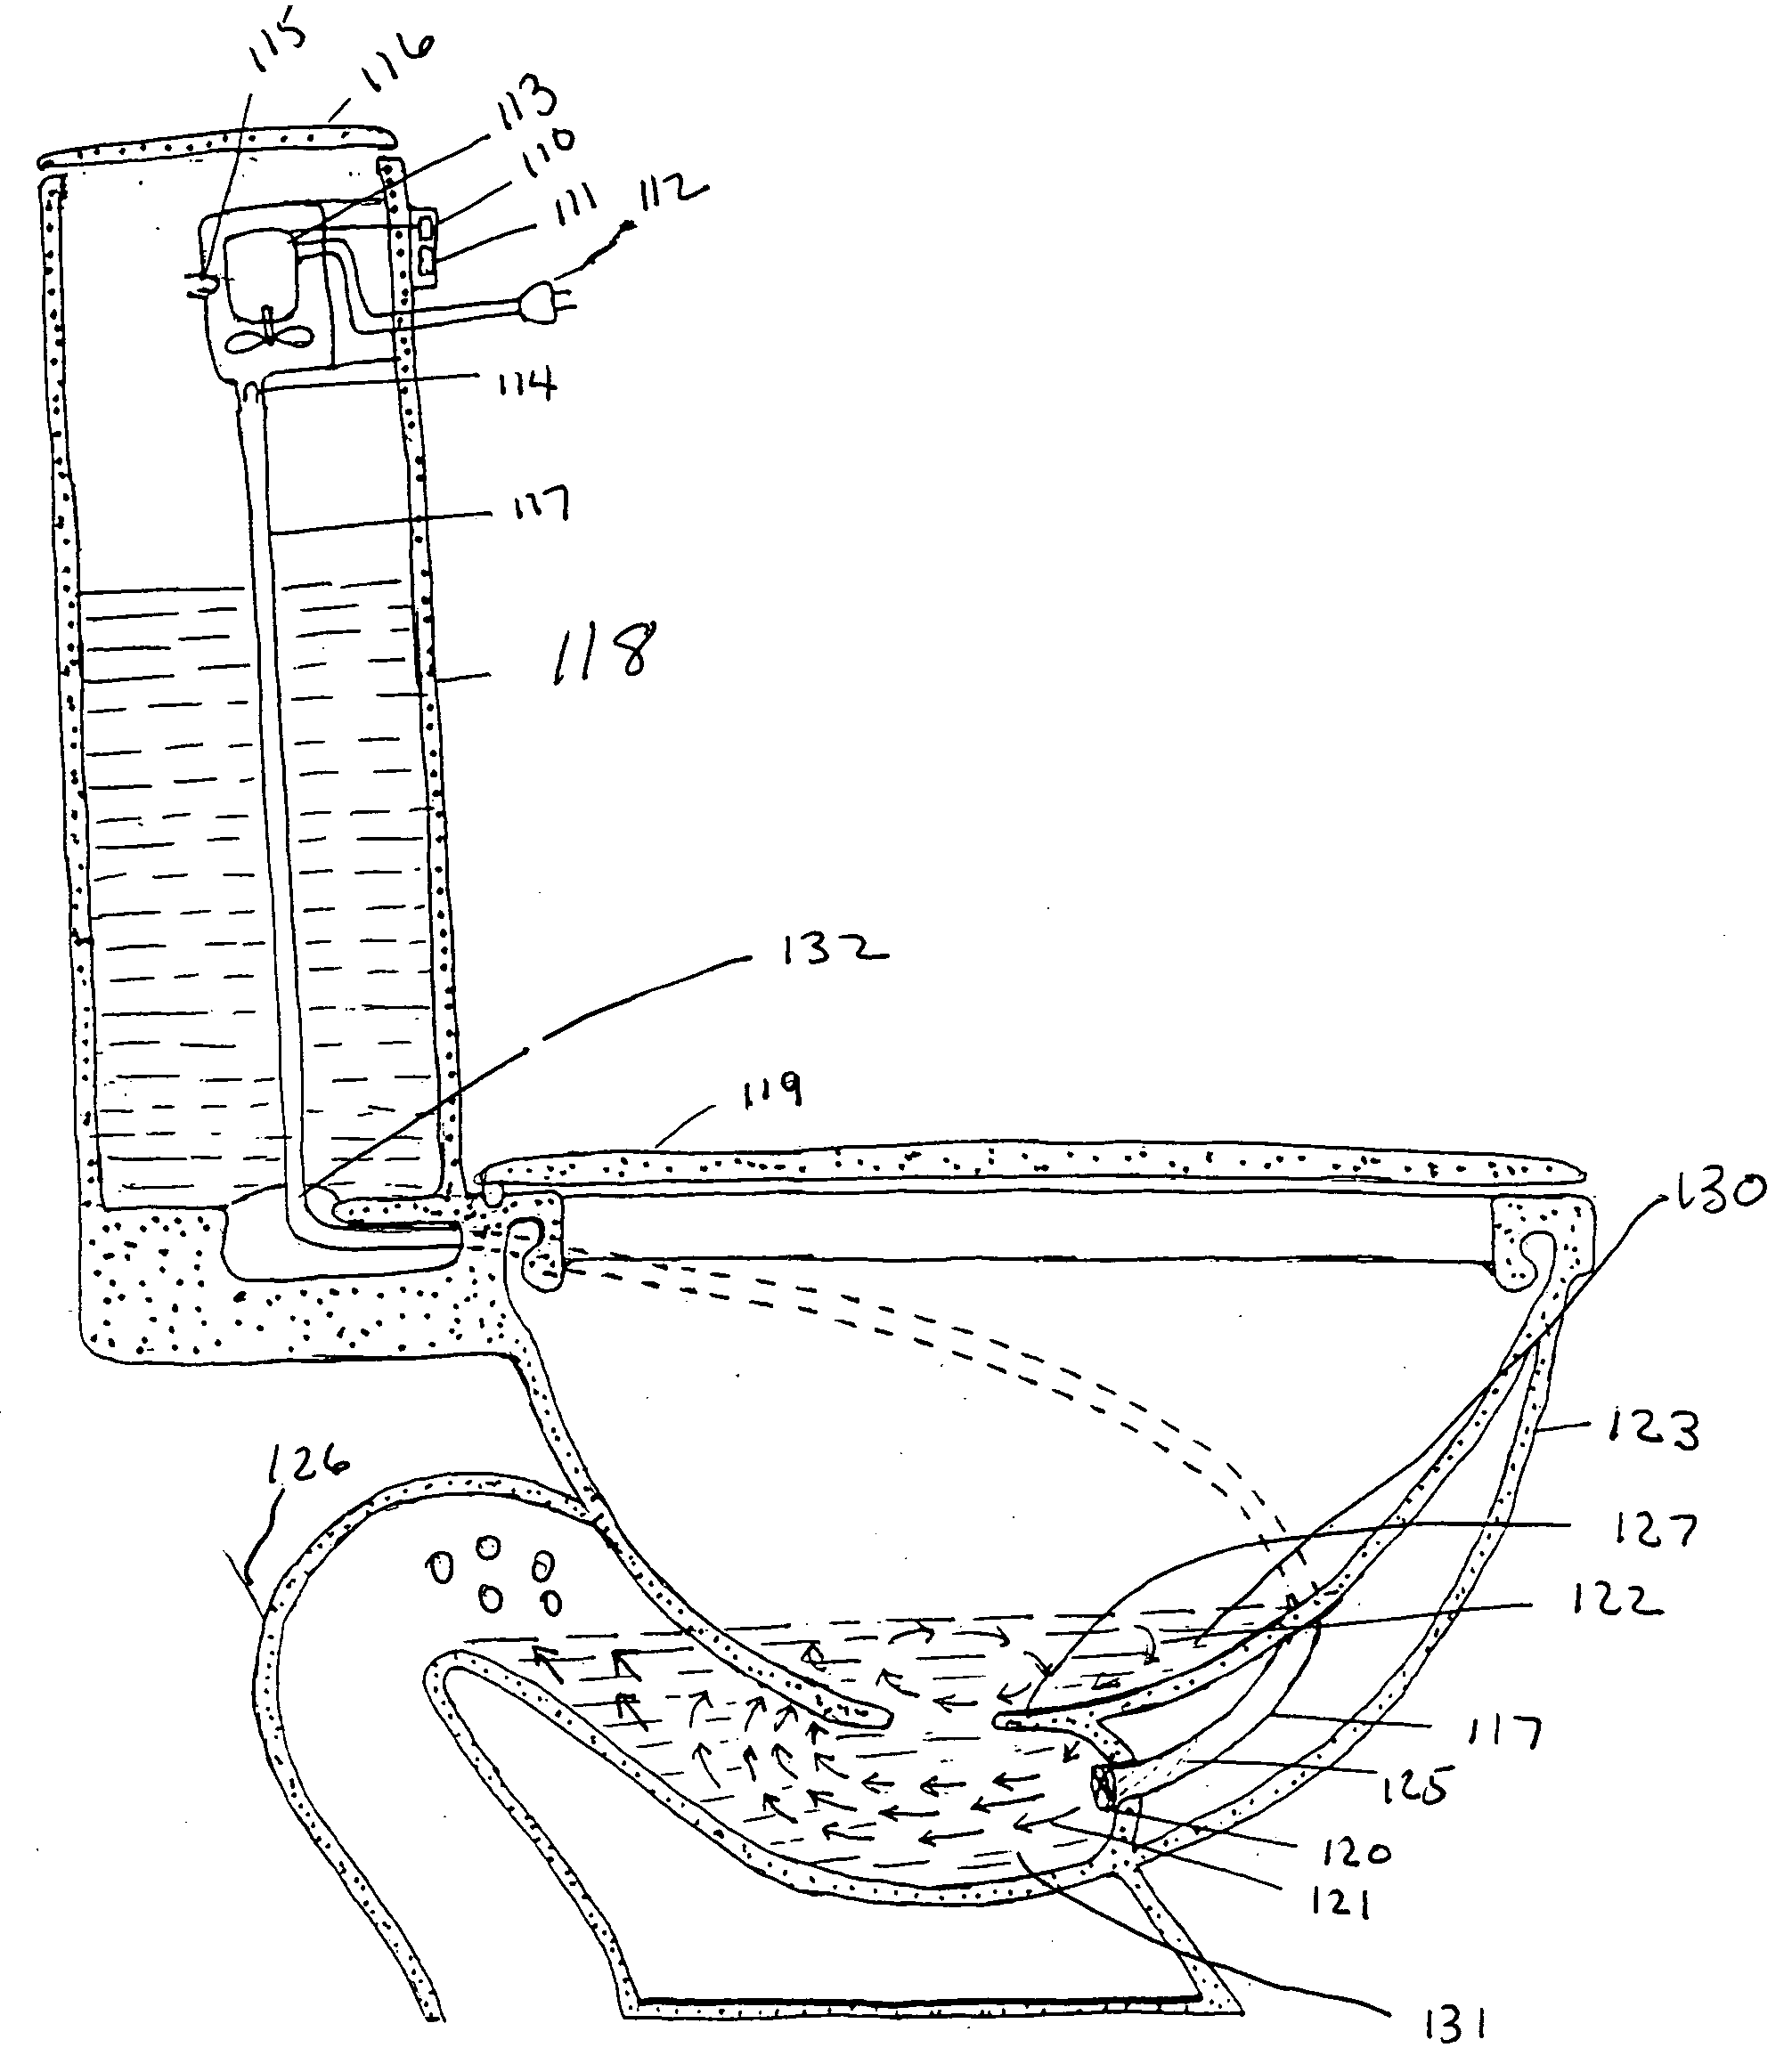 Method and apparatus to reduce toilet splash using water current and turbulence